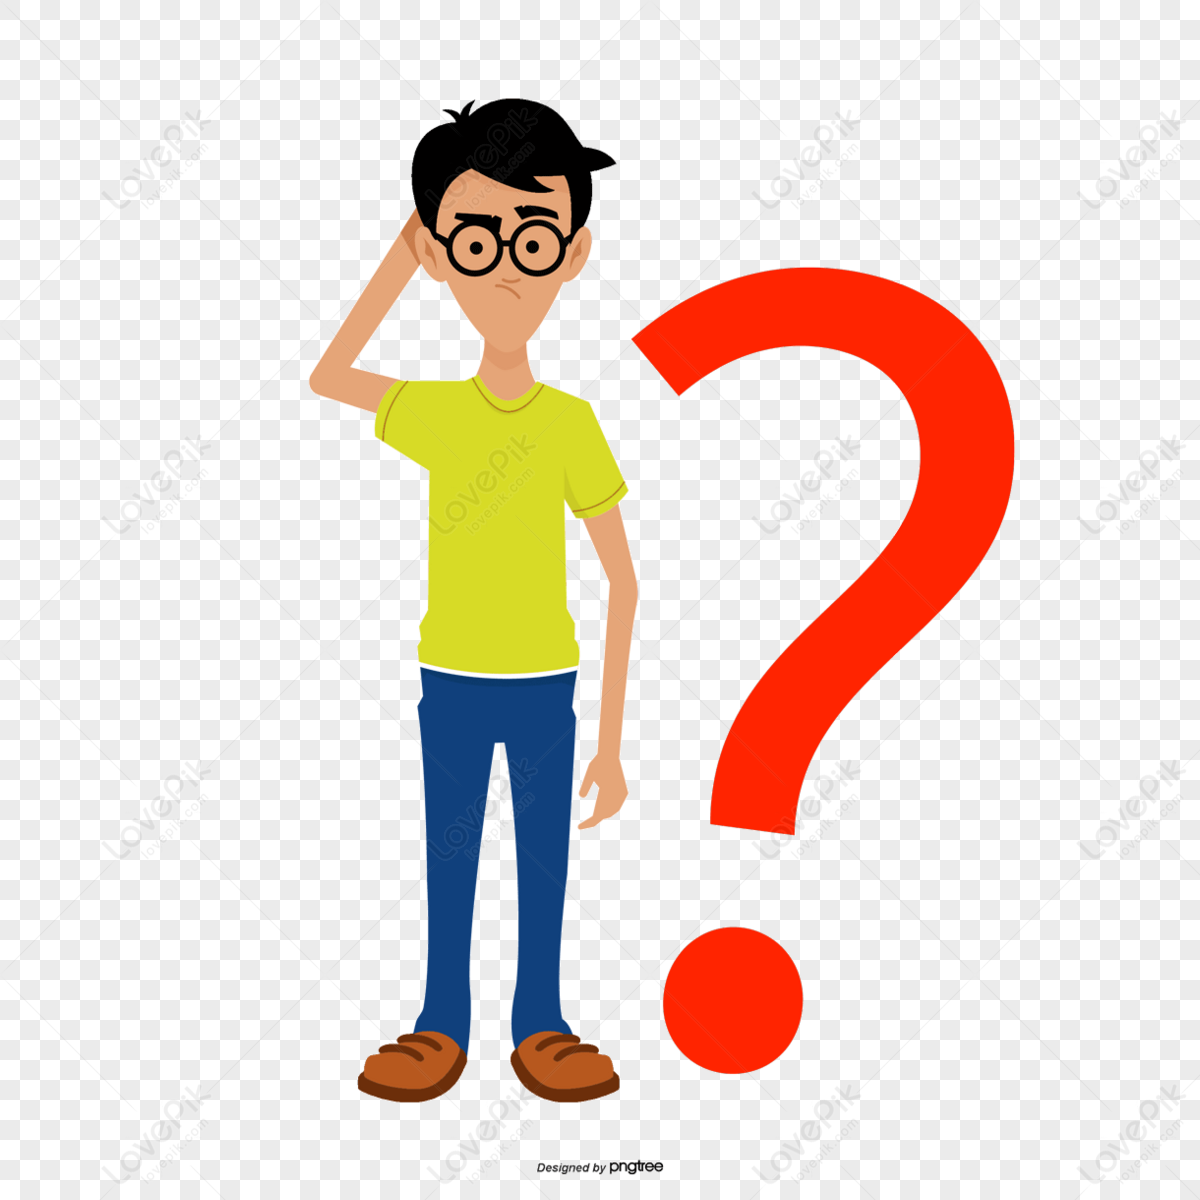 Big Question Mark PNG Images With Transparent Background | Free ...